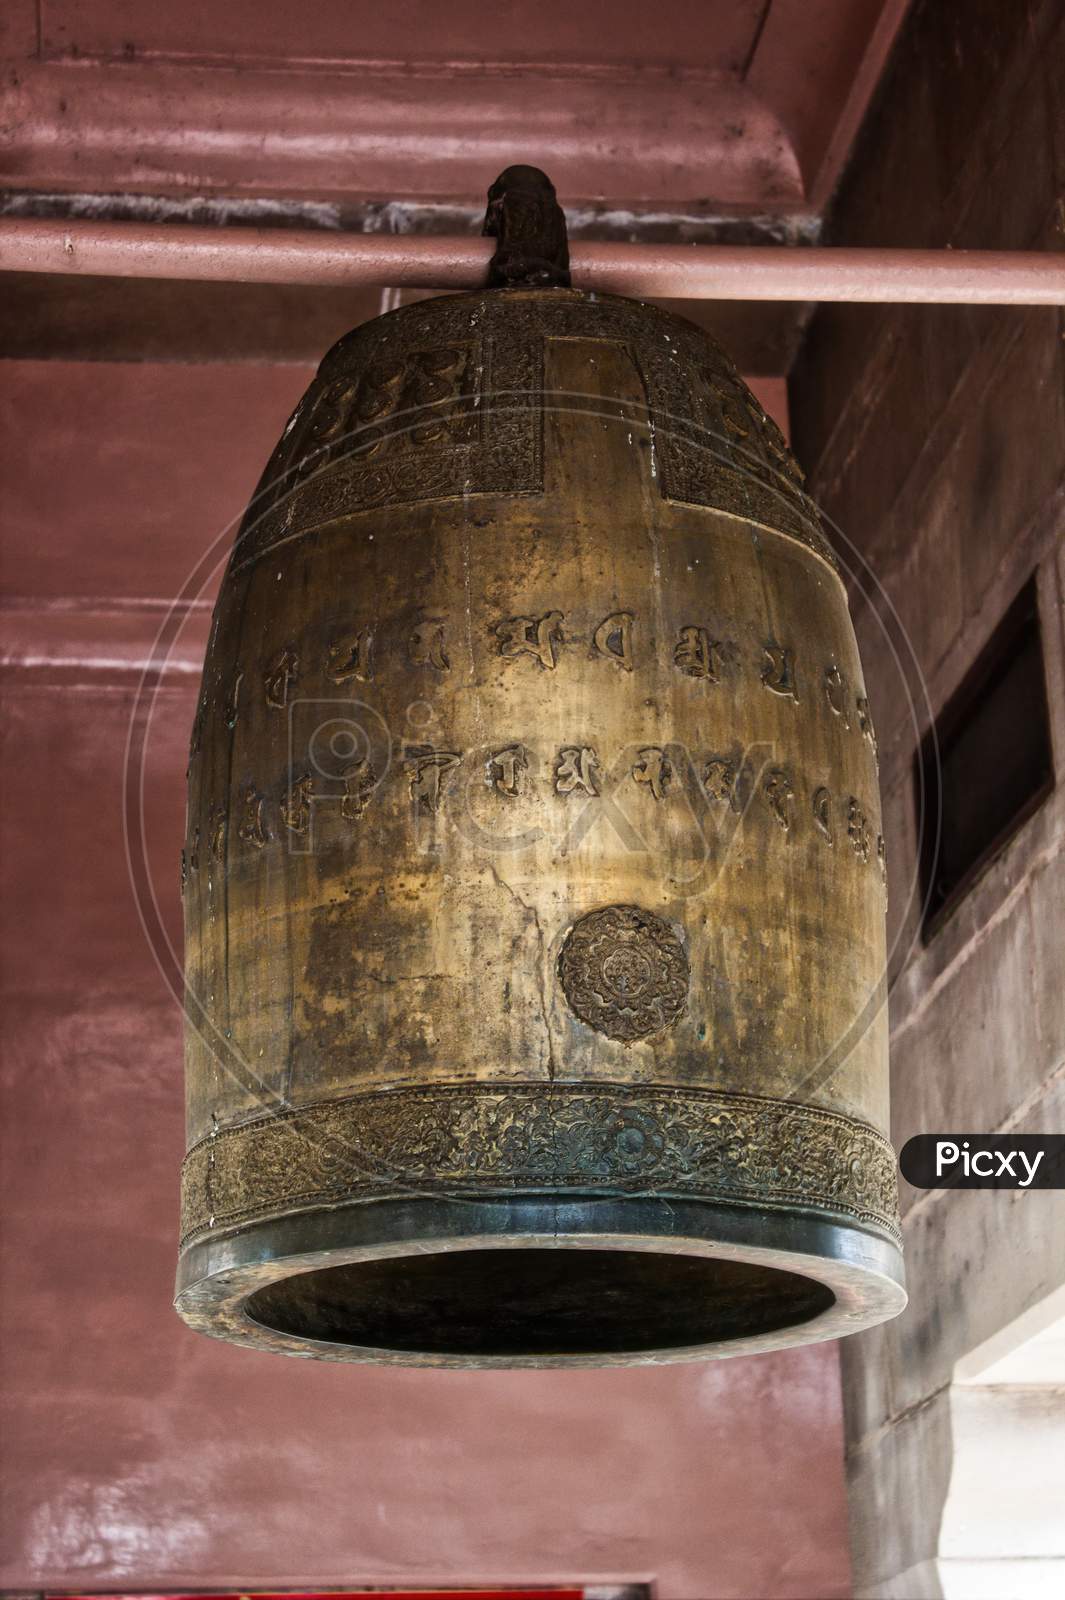 The Sacred Giant Prayer Bell Inside Famous Buddha Temple In Sarnath, Where Buddha Gained Enlightenment About 2500 Years Ago Located In Varanasi Or Banaras, Uttar Pradesh, India